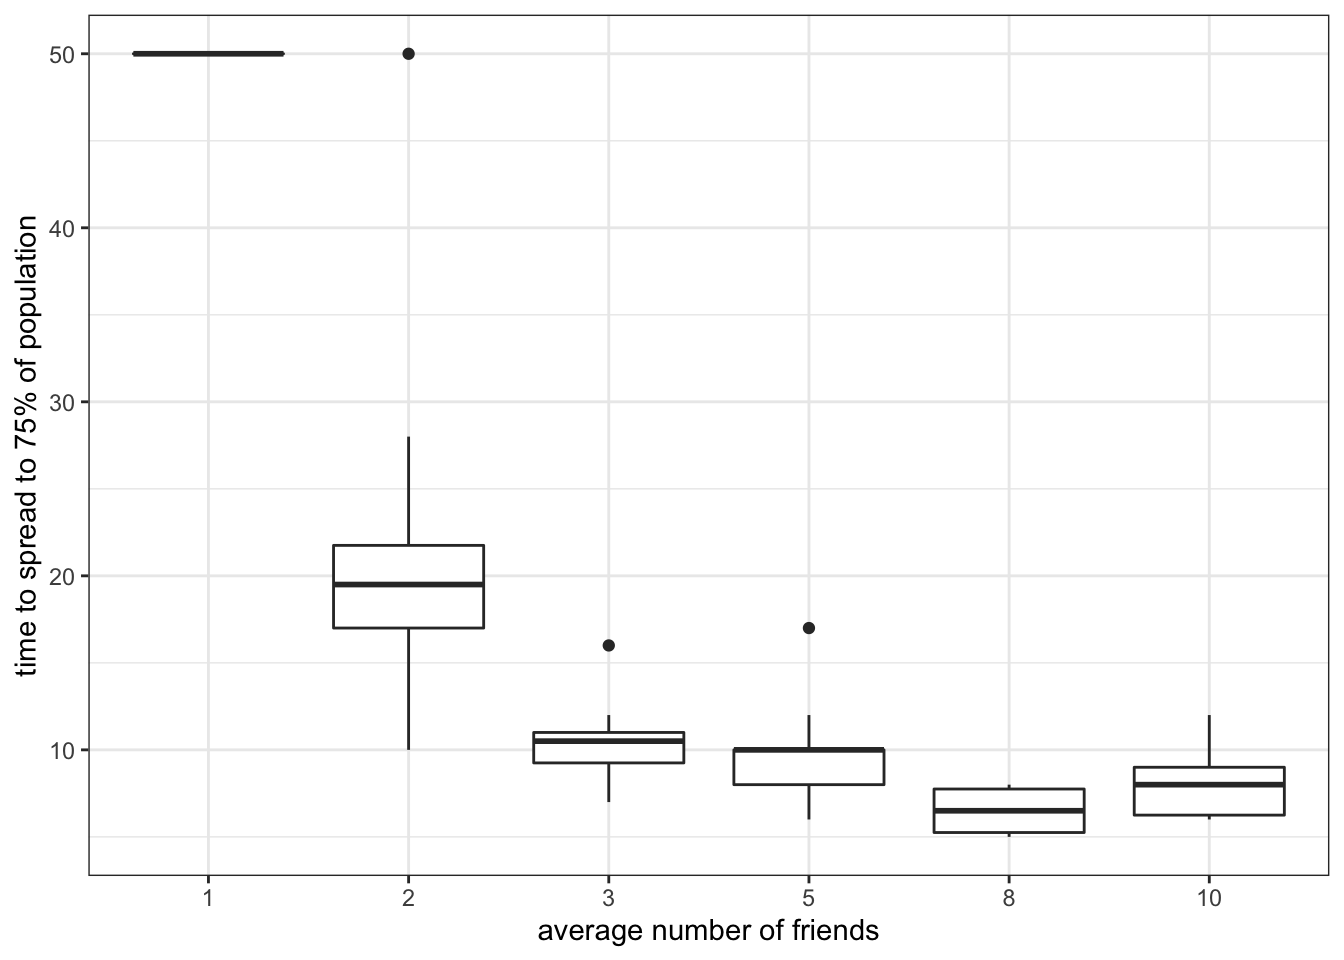 Speed at which gossip spreads depending on the average number of friends.